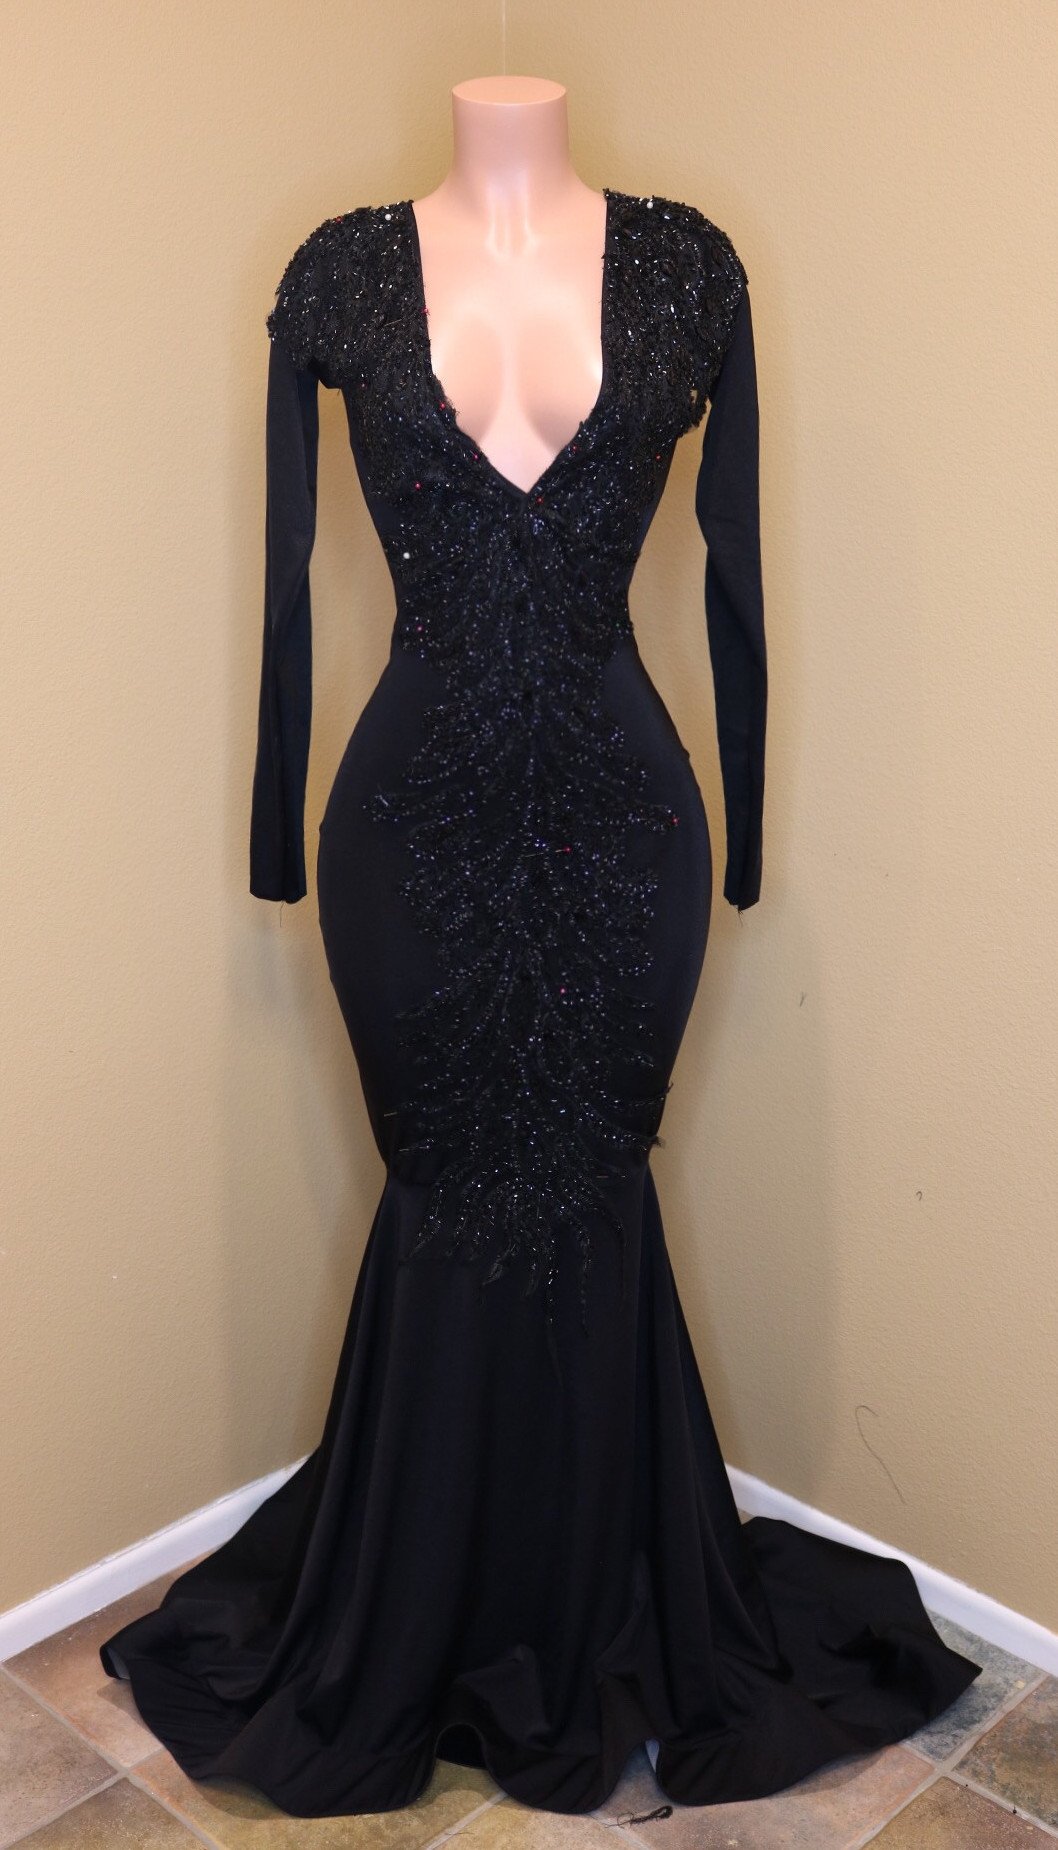 Exquisite Long V-neck Sequined Mermaid Black Prom Dress with Sleeves-BIZTUNNEL